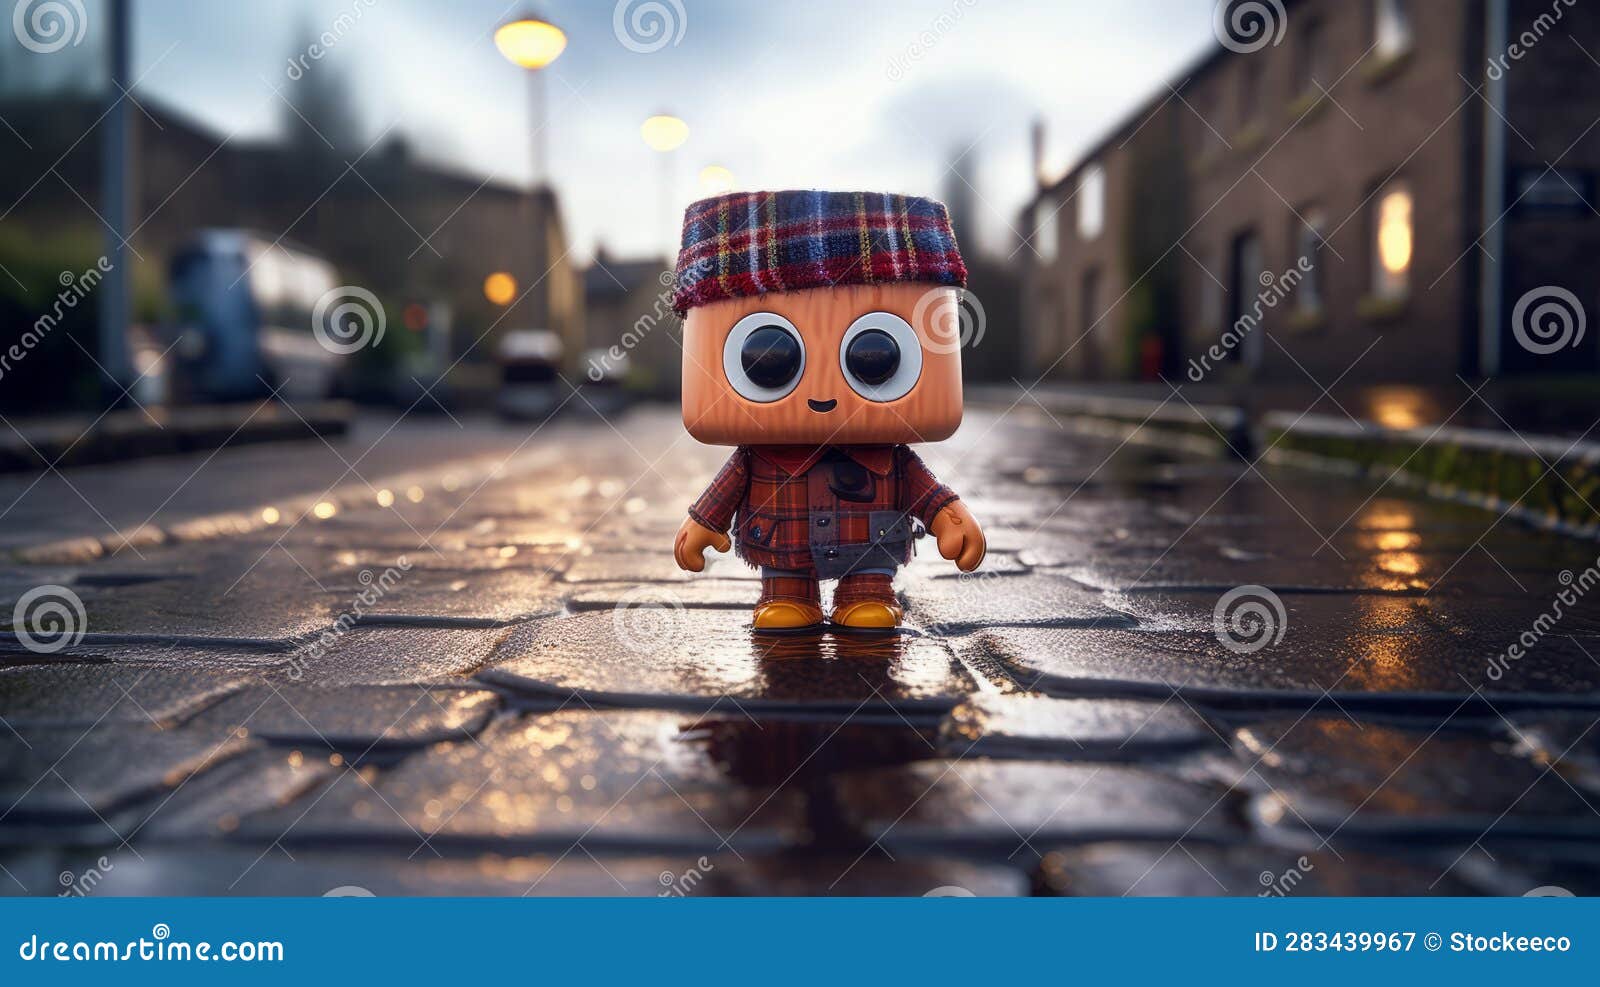 tiny scottish robot walking in the rain with pop culture mash-up